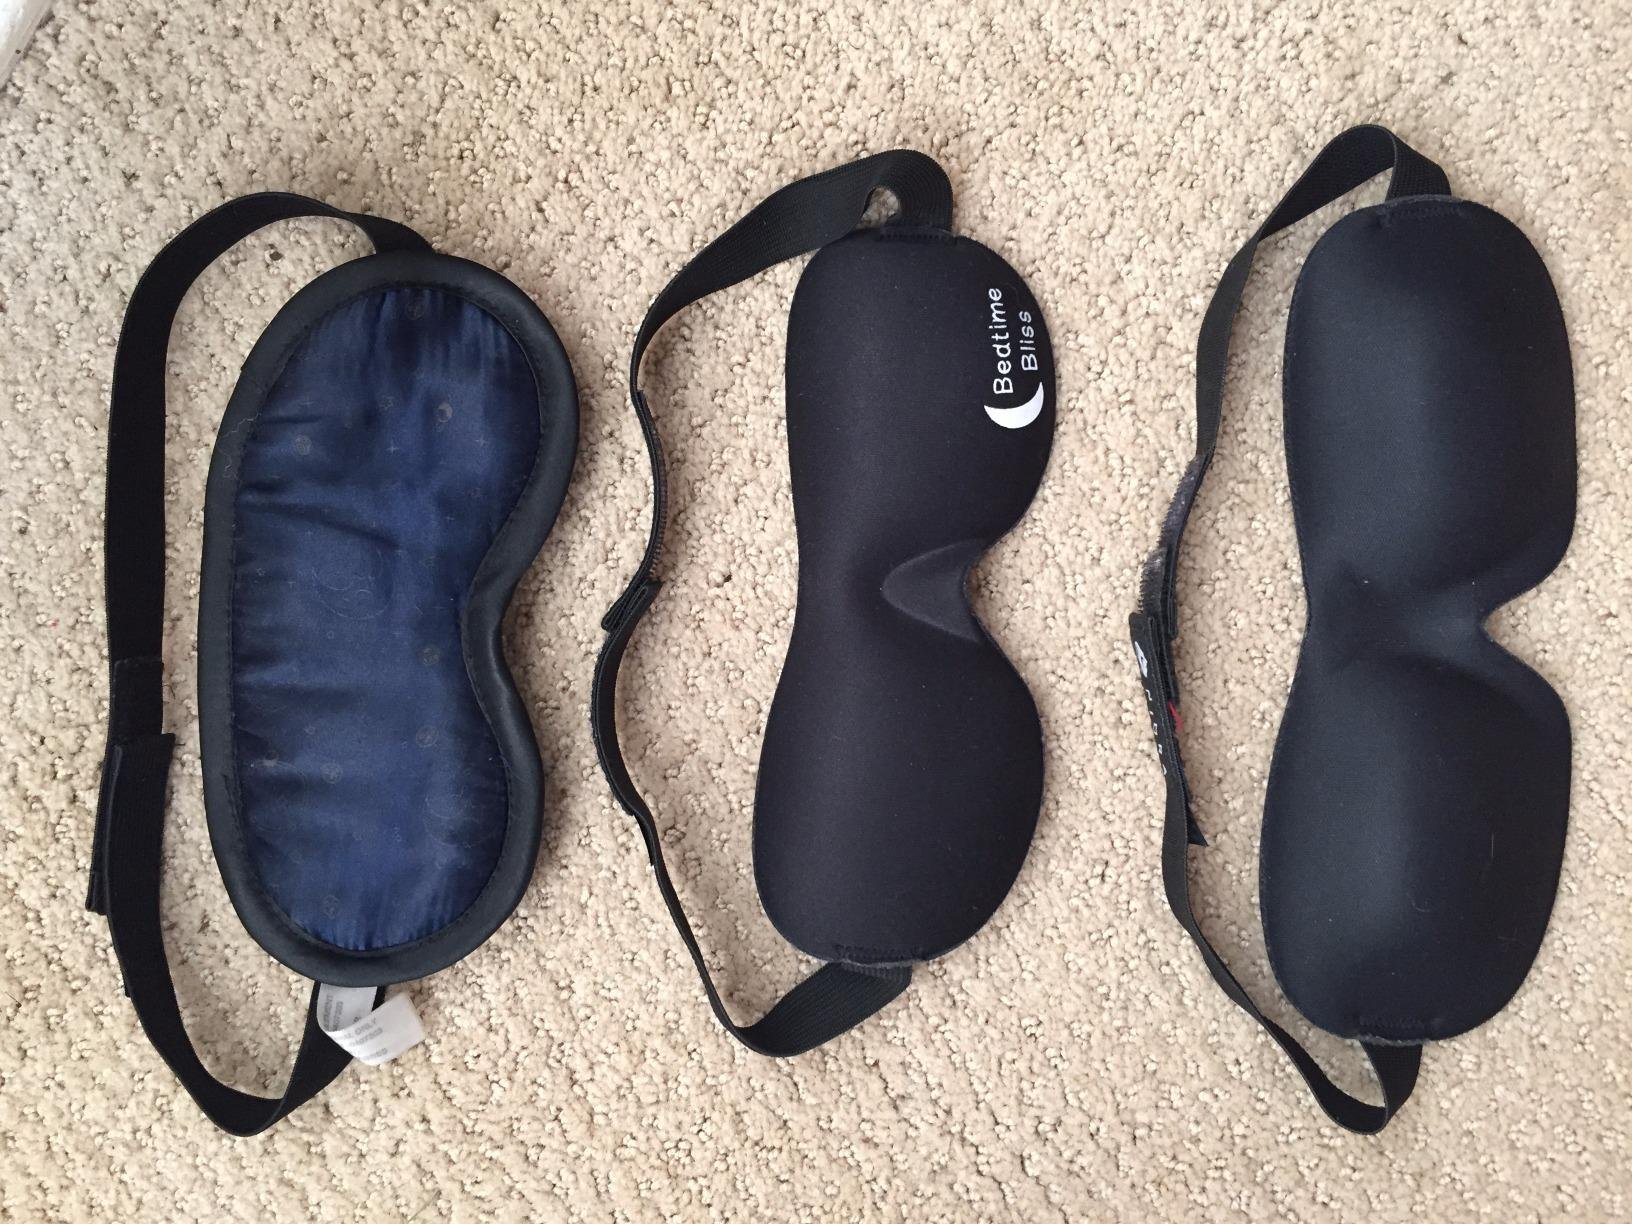 Side by side comparison of three sleep masks-Nidra has a flaw, but is my favorite